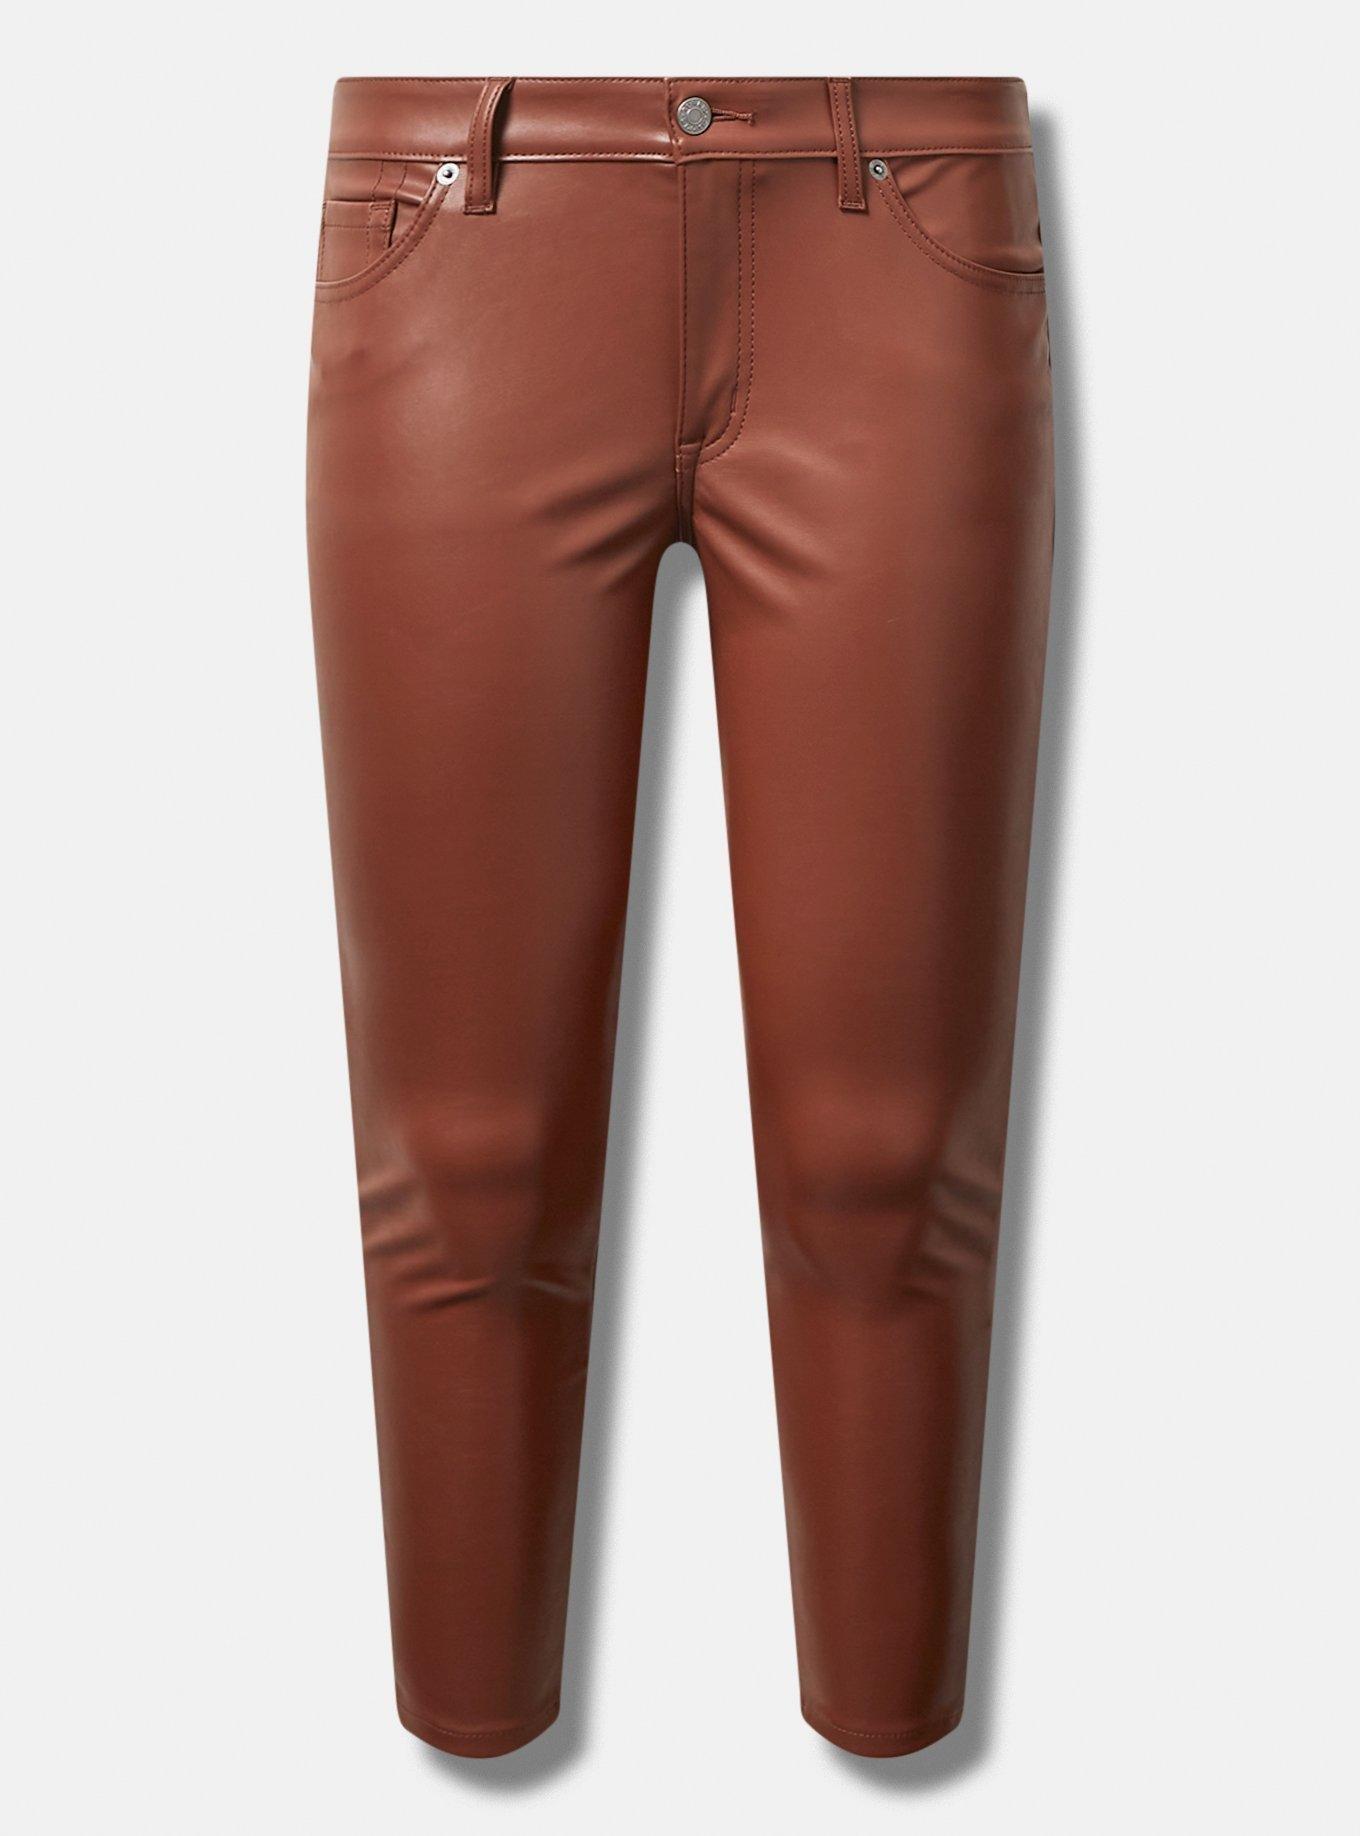 Plus Size - Perfect Skinny Faux Leather Mid Rise Pant - Torrid